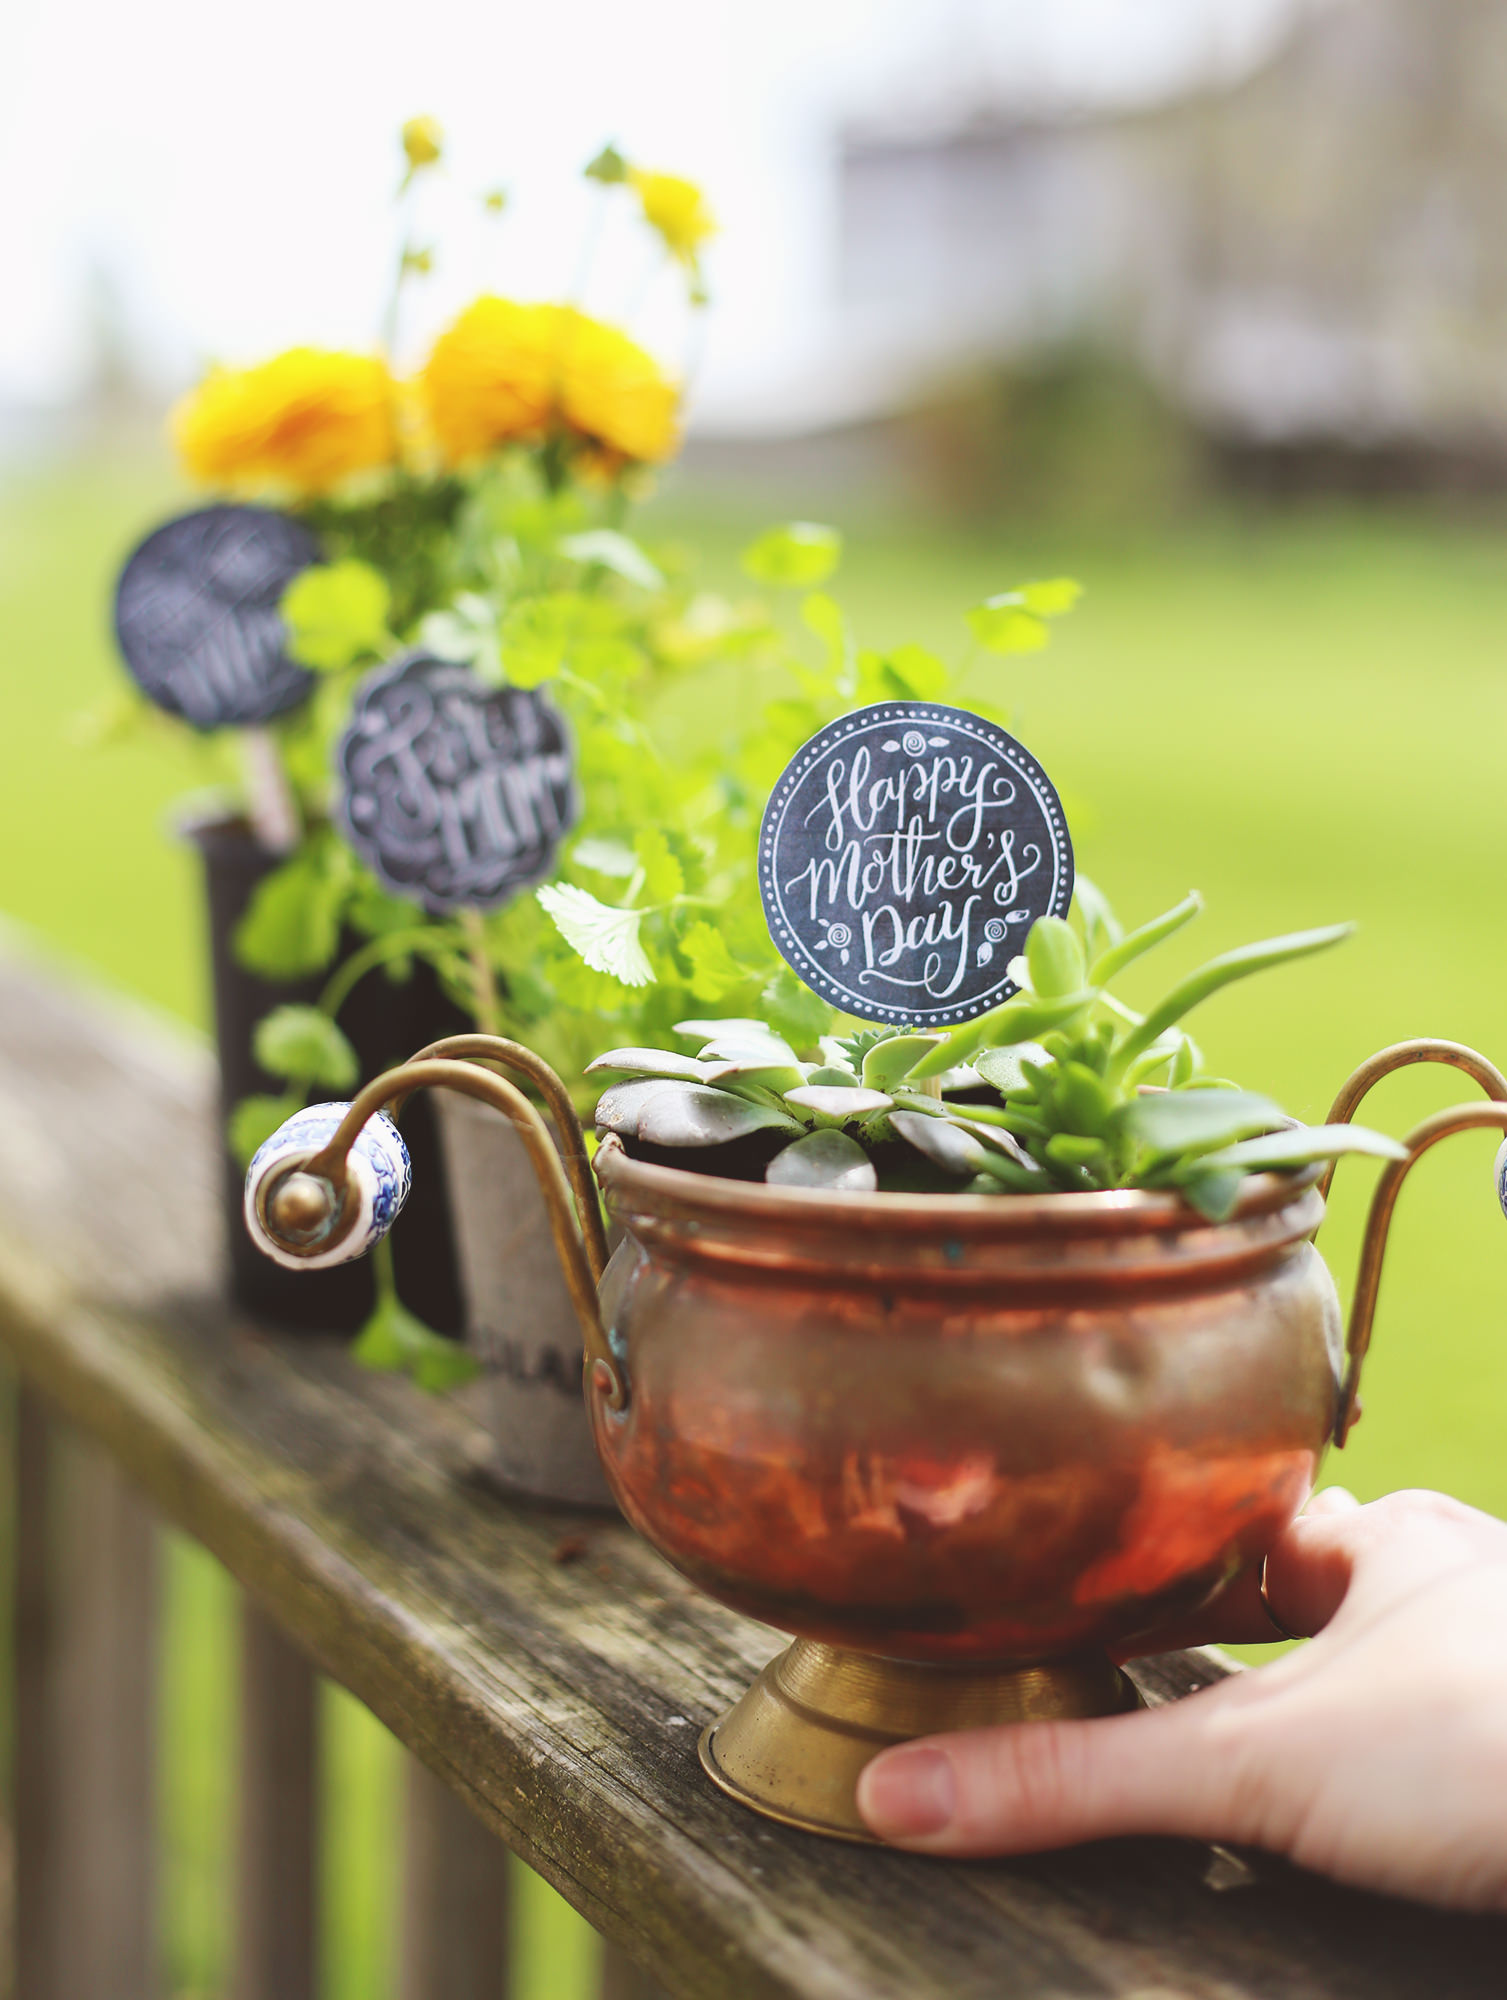 No need for wrapping or ribbons, just download our free, chalkboard Mother's Day gift tags and your plants will be gift-ready!